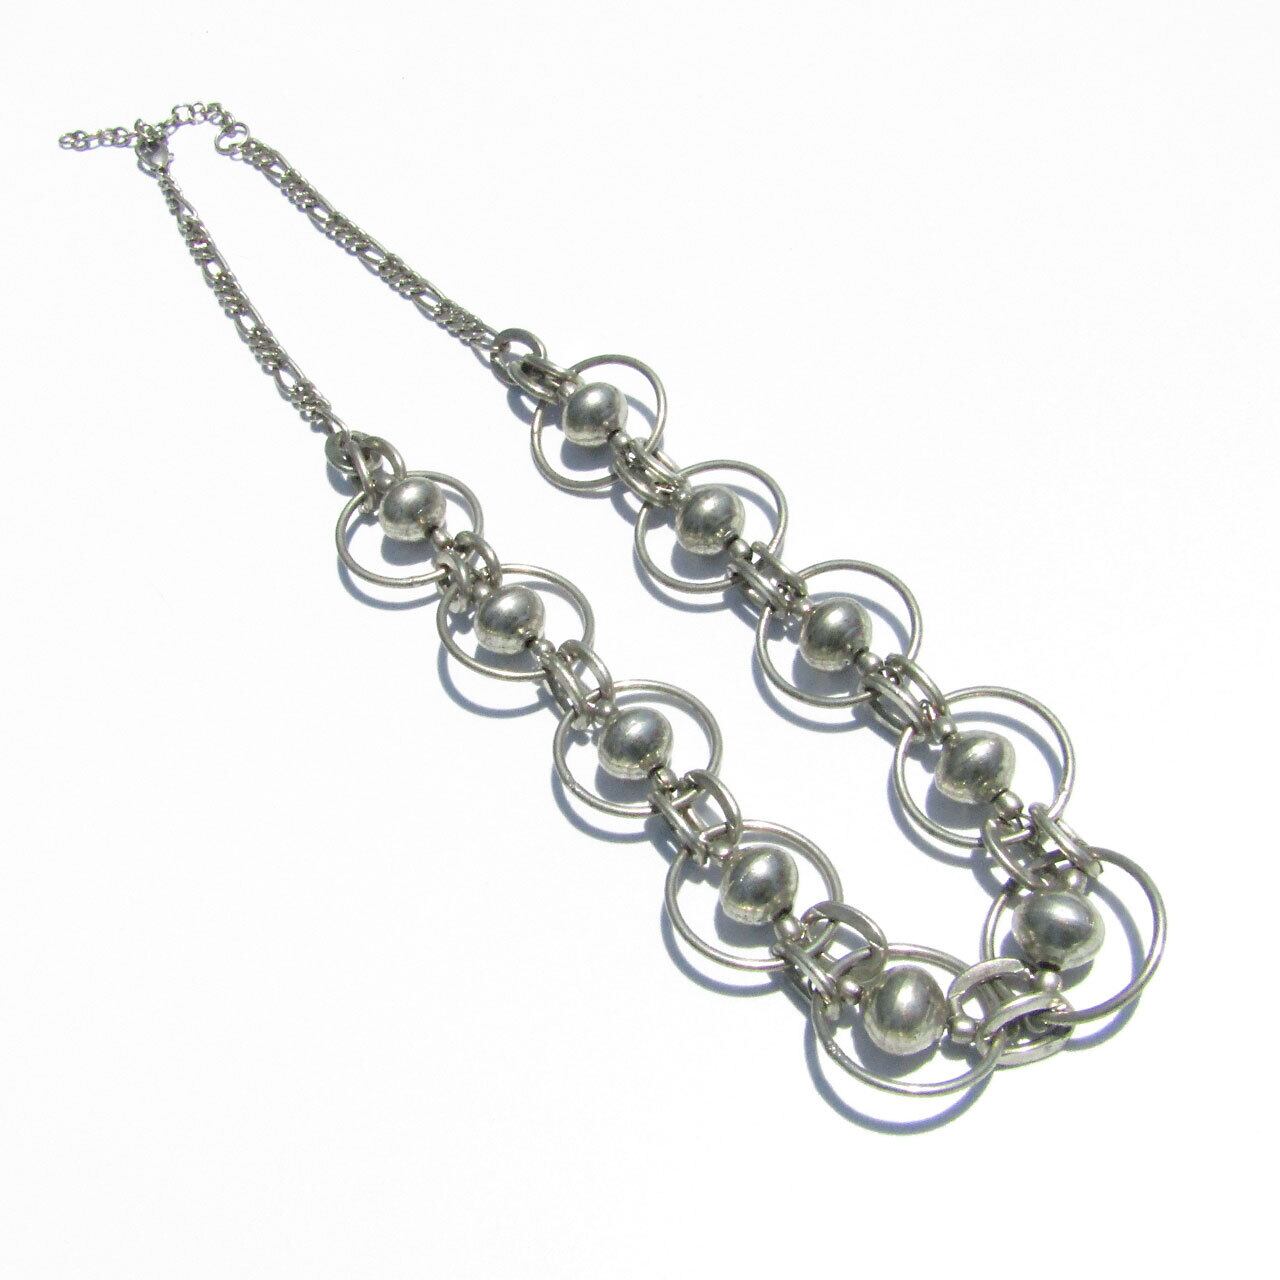 80s Vintage silver tone design chain necklace | PANIC ART MARKET powered by  BASE